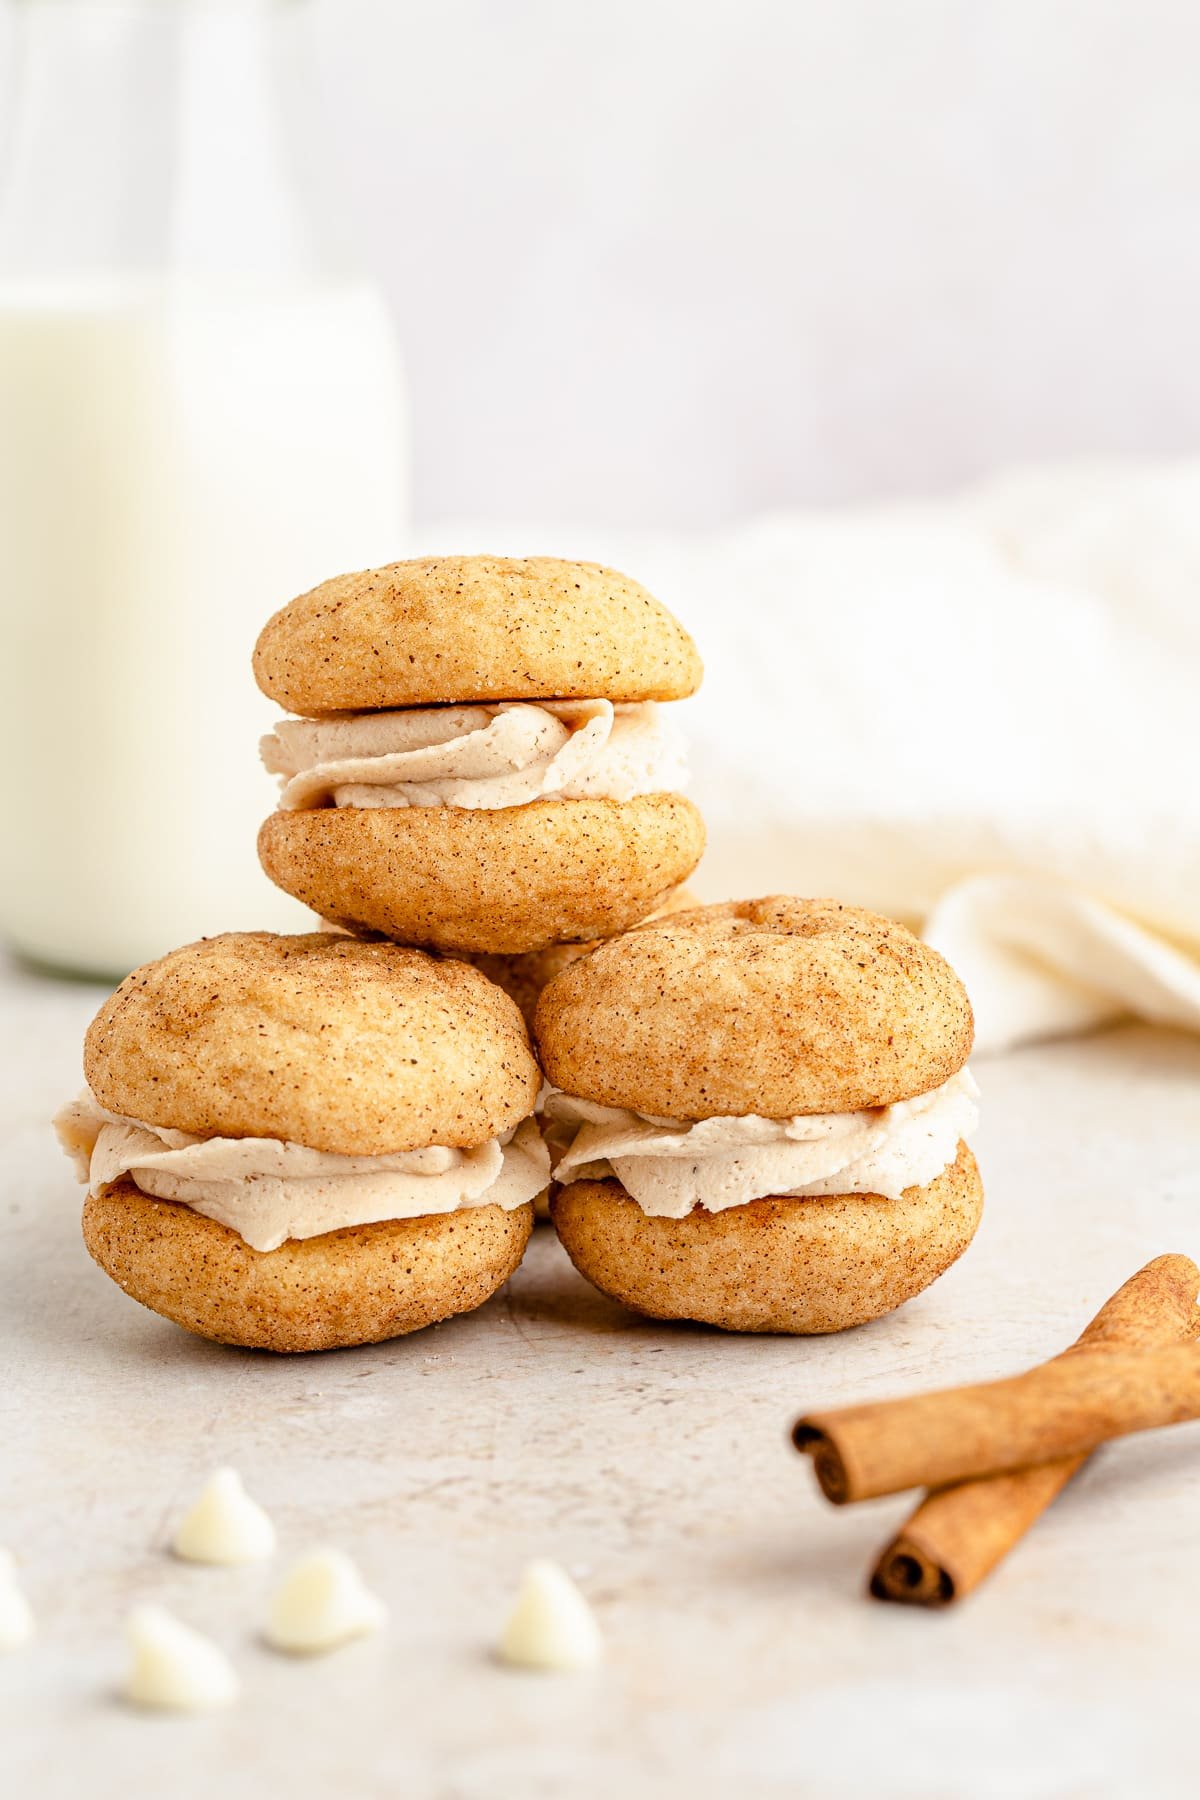 Three stacked Snickerdoodle Sandwich Cookies with cinnamon sticks and milk.